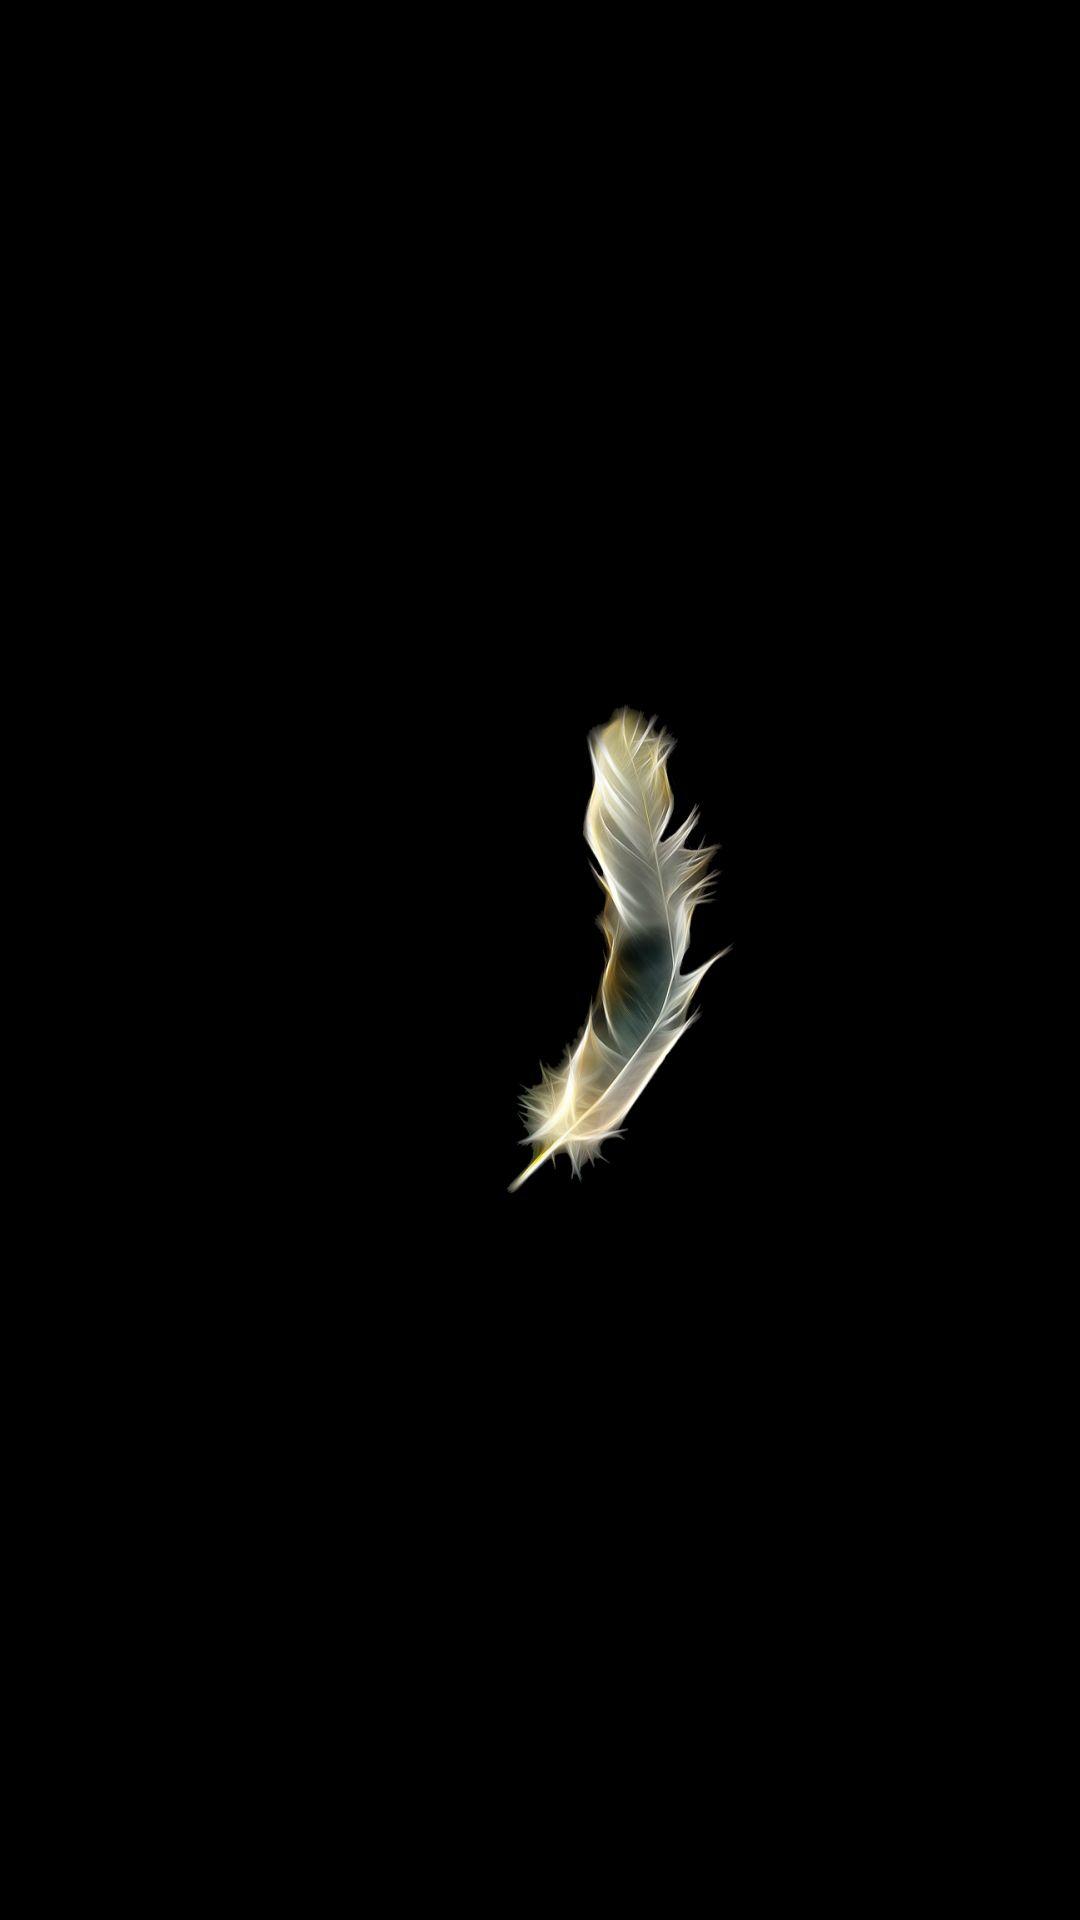 Black White Abstract Feather Android Wallpaper free download